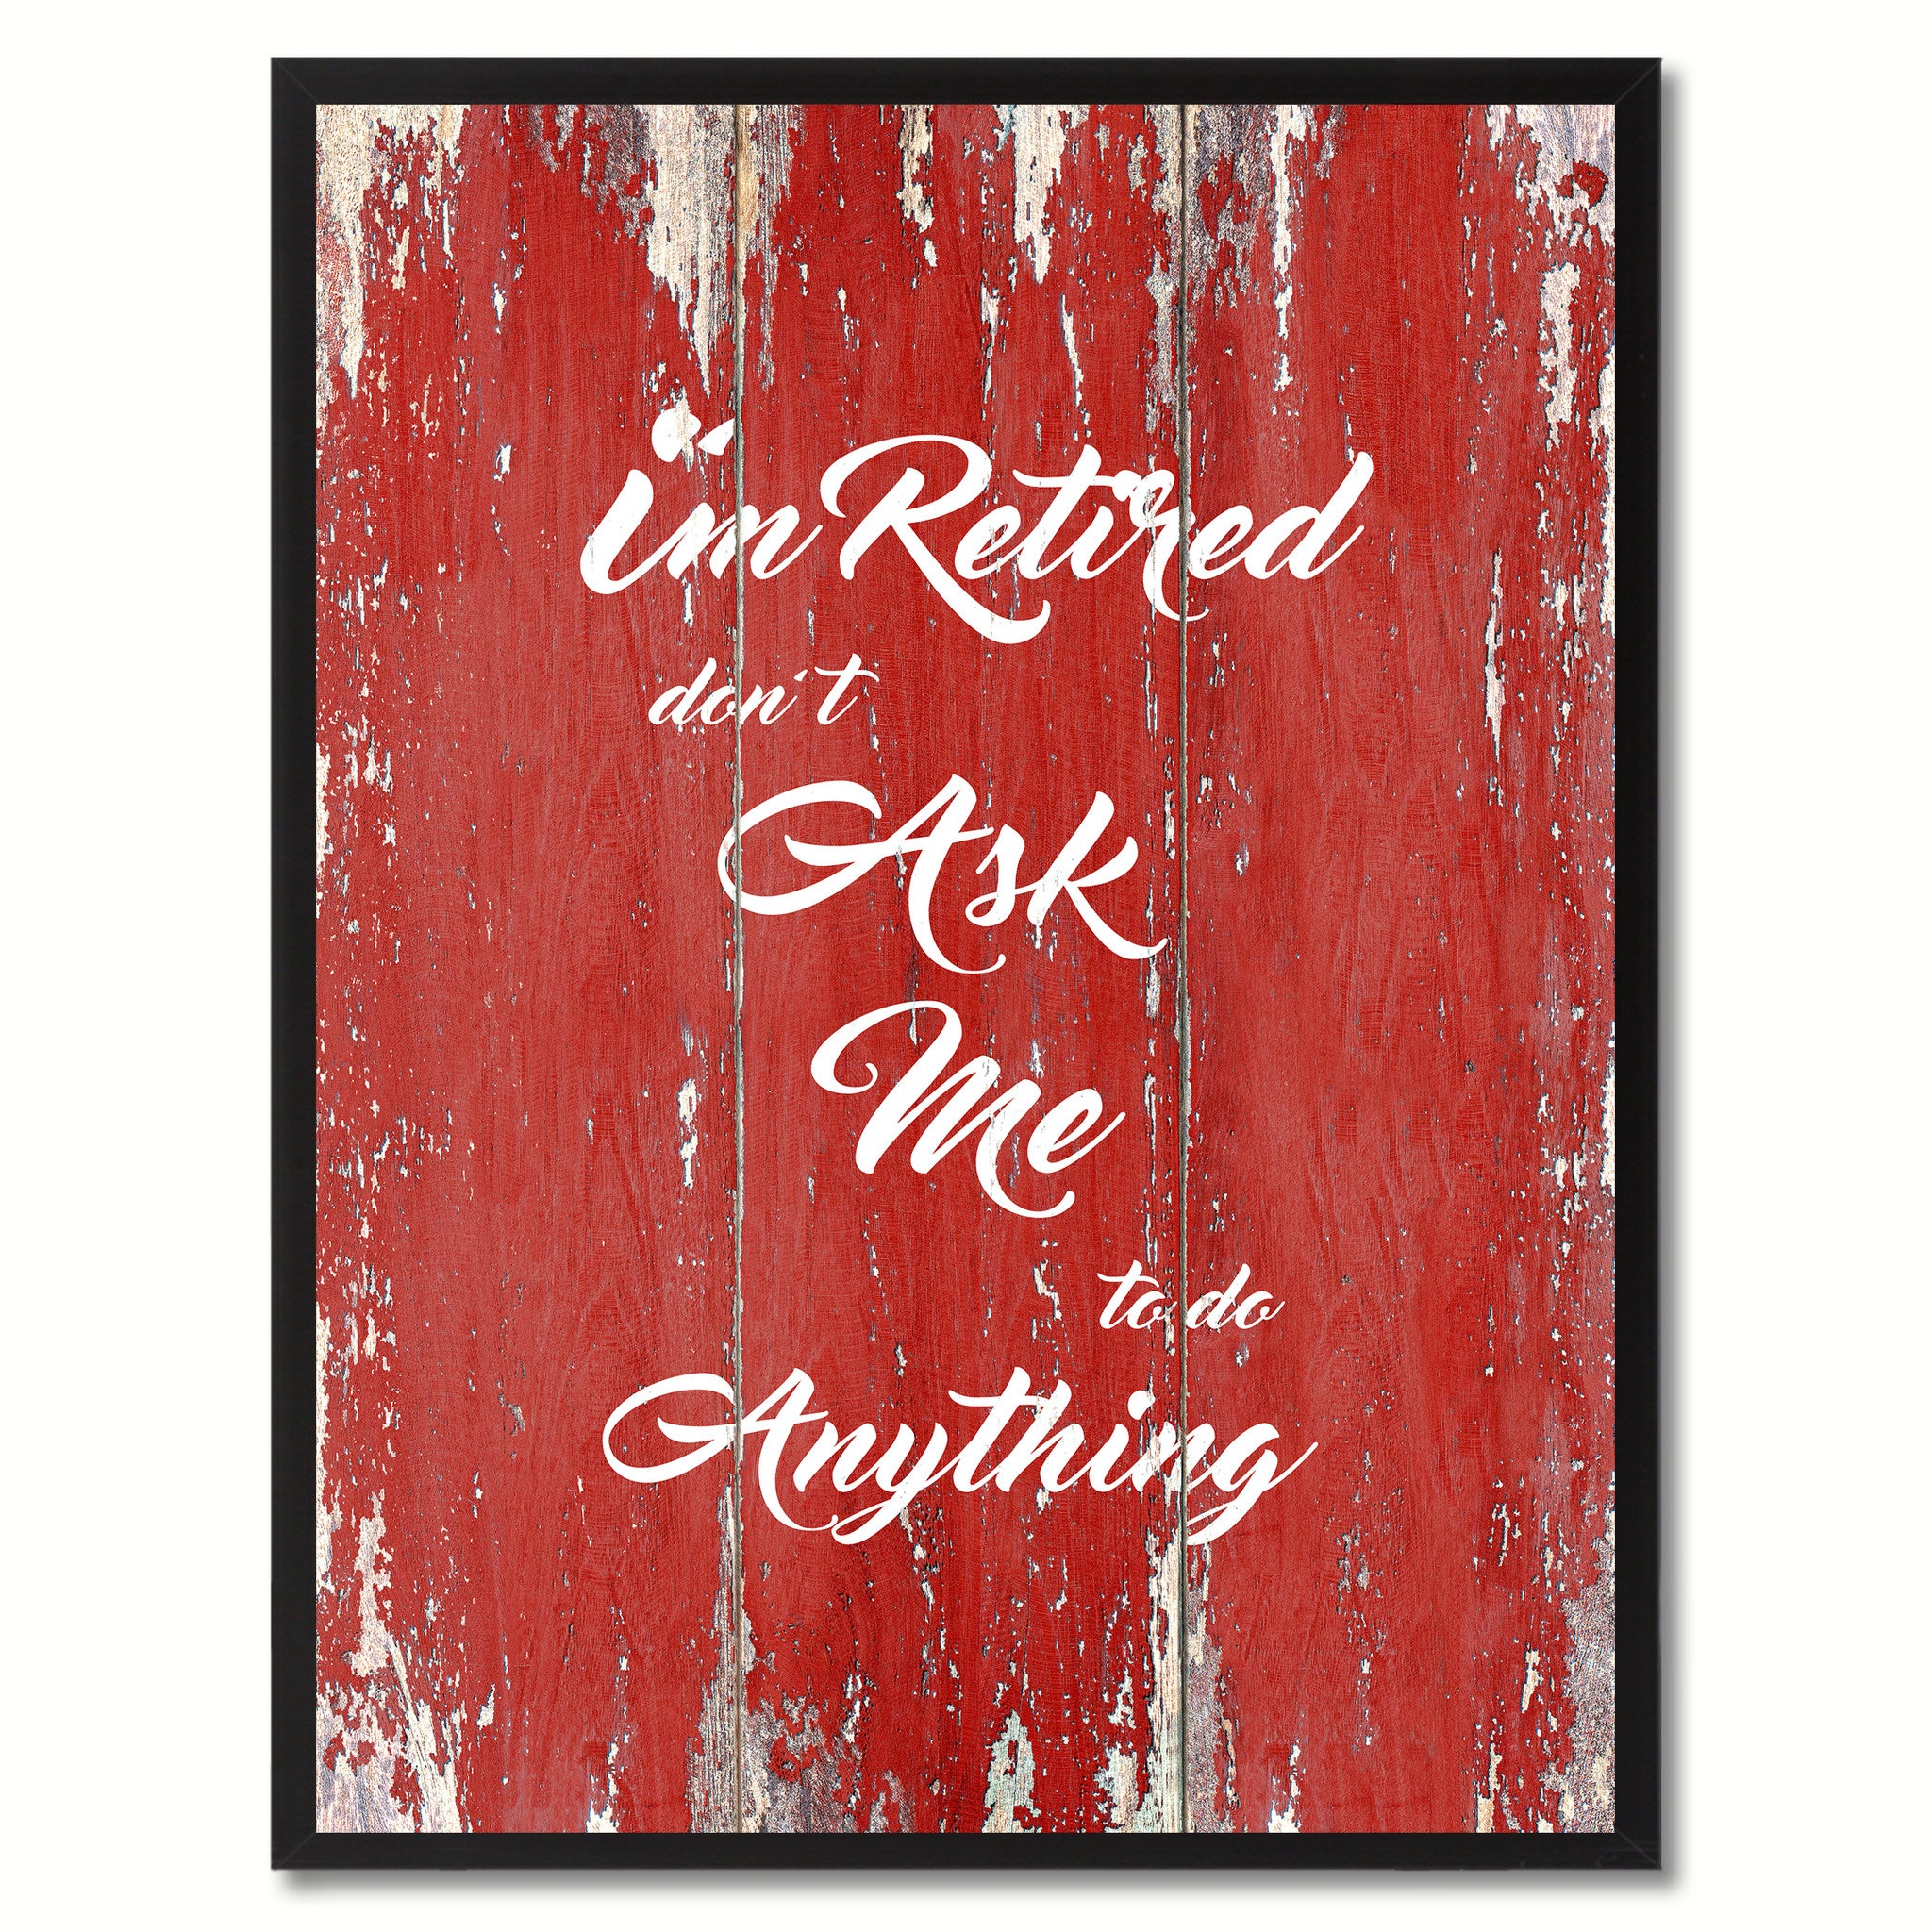 I'm Retired Don't Ask Me To Do Anything Saying Canvas Print, Black Picture Frame Home Decor Wall Art Gifts